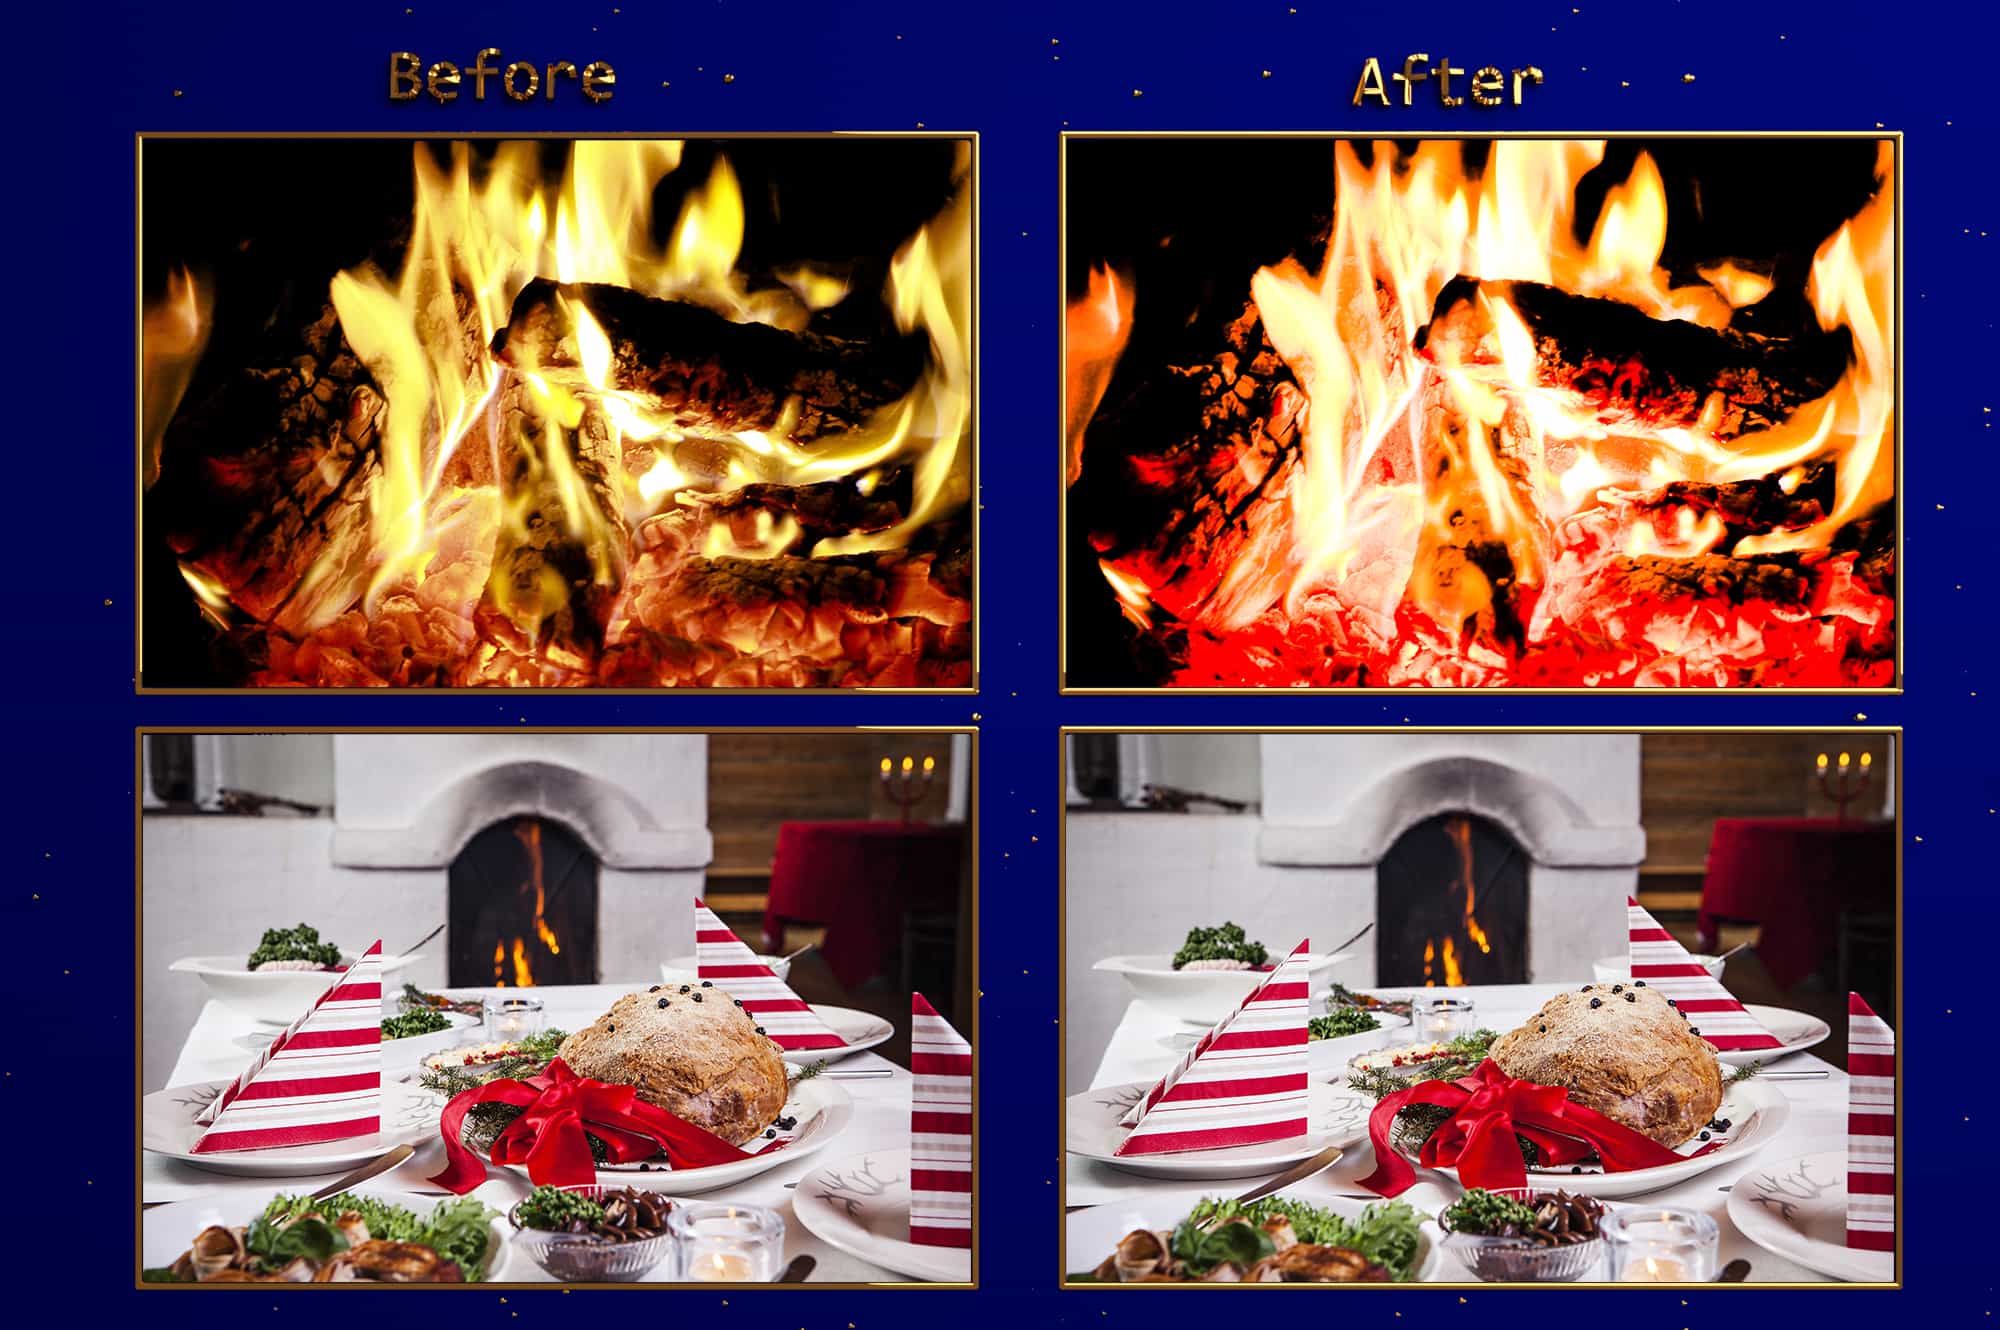 Preset for photo with fireplace.